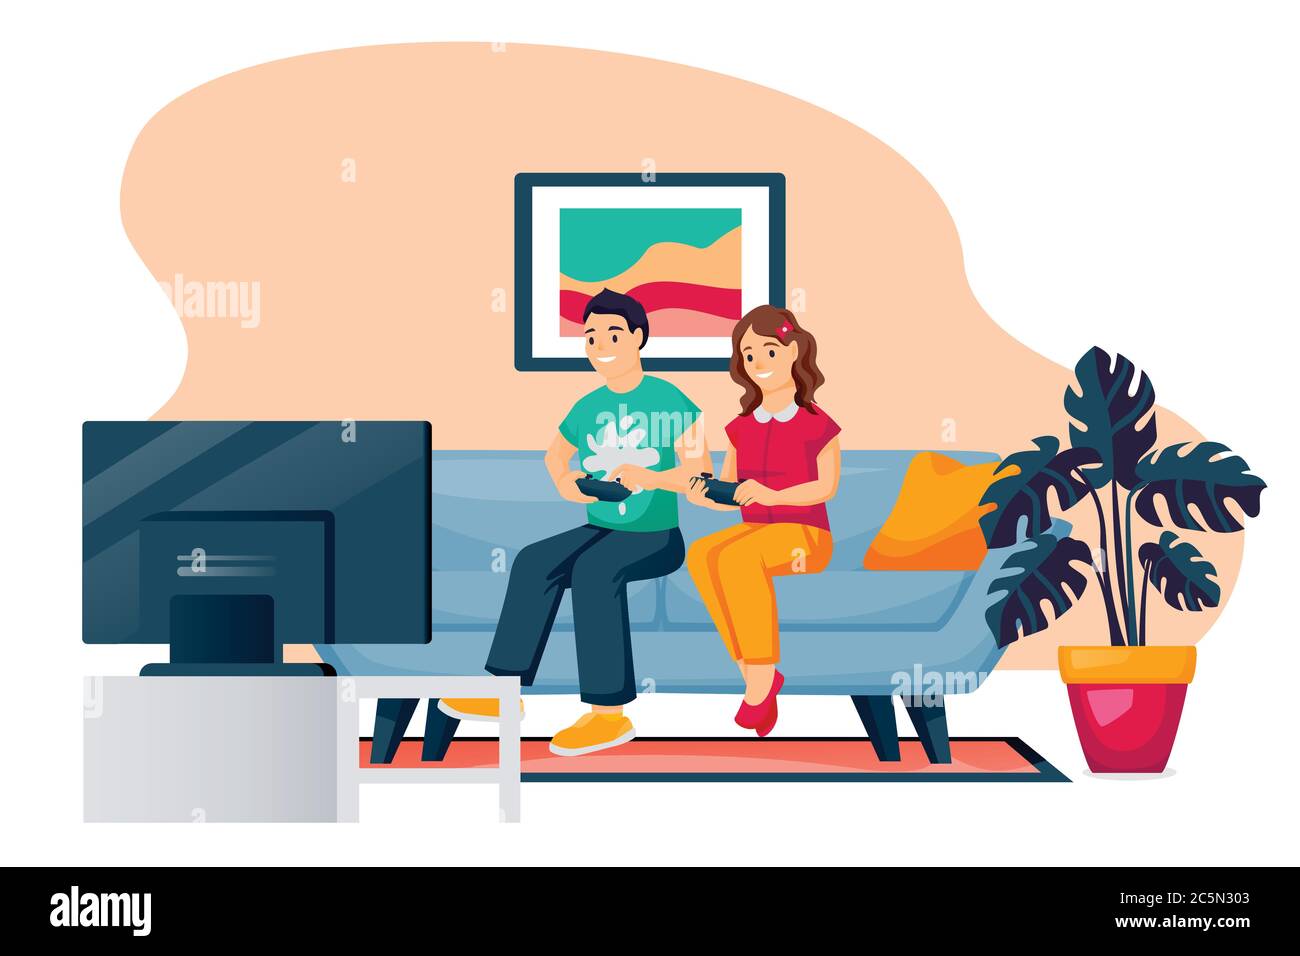 Happy kids play in video game. Little boy and girl with gamepads sit on sofa in playroom in front of TV. Vector characters illustration. Family leisur Stock Vector